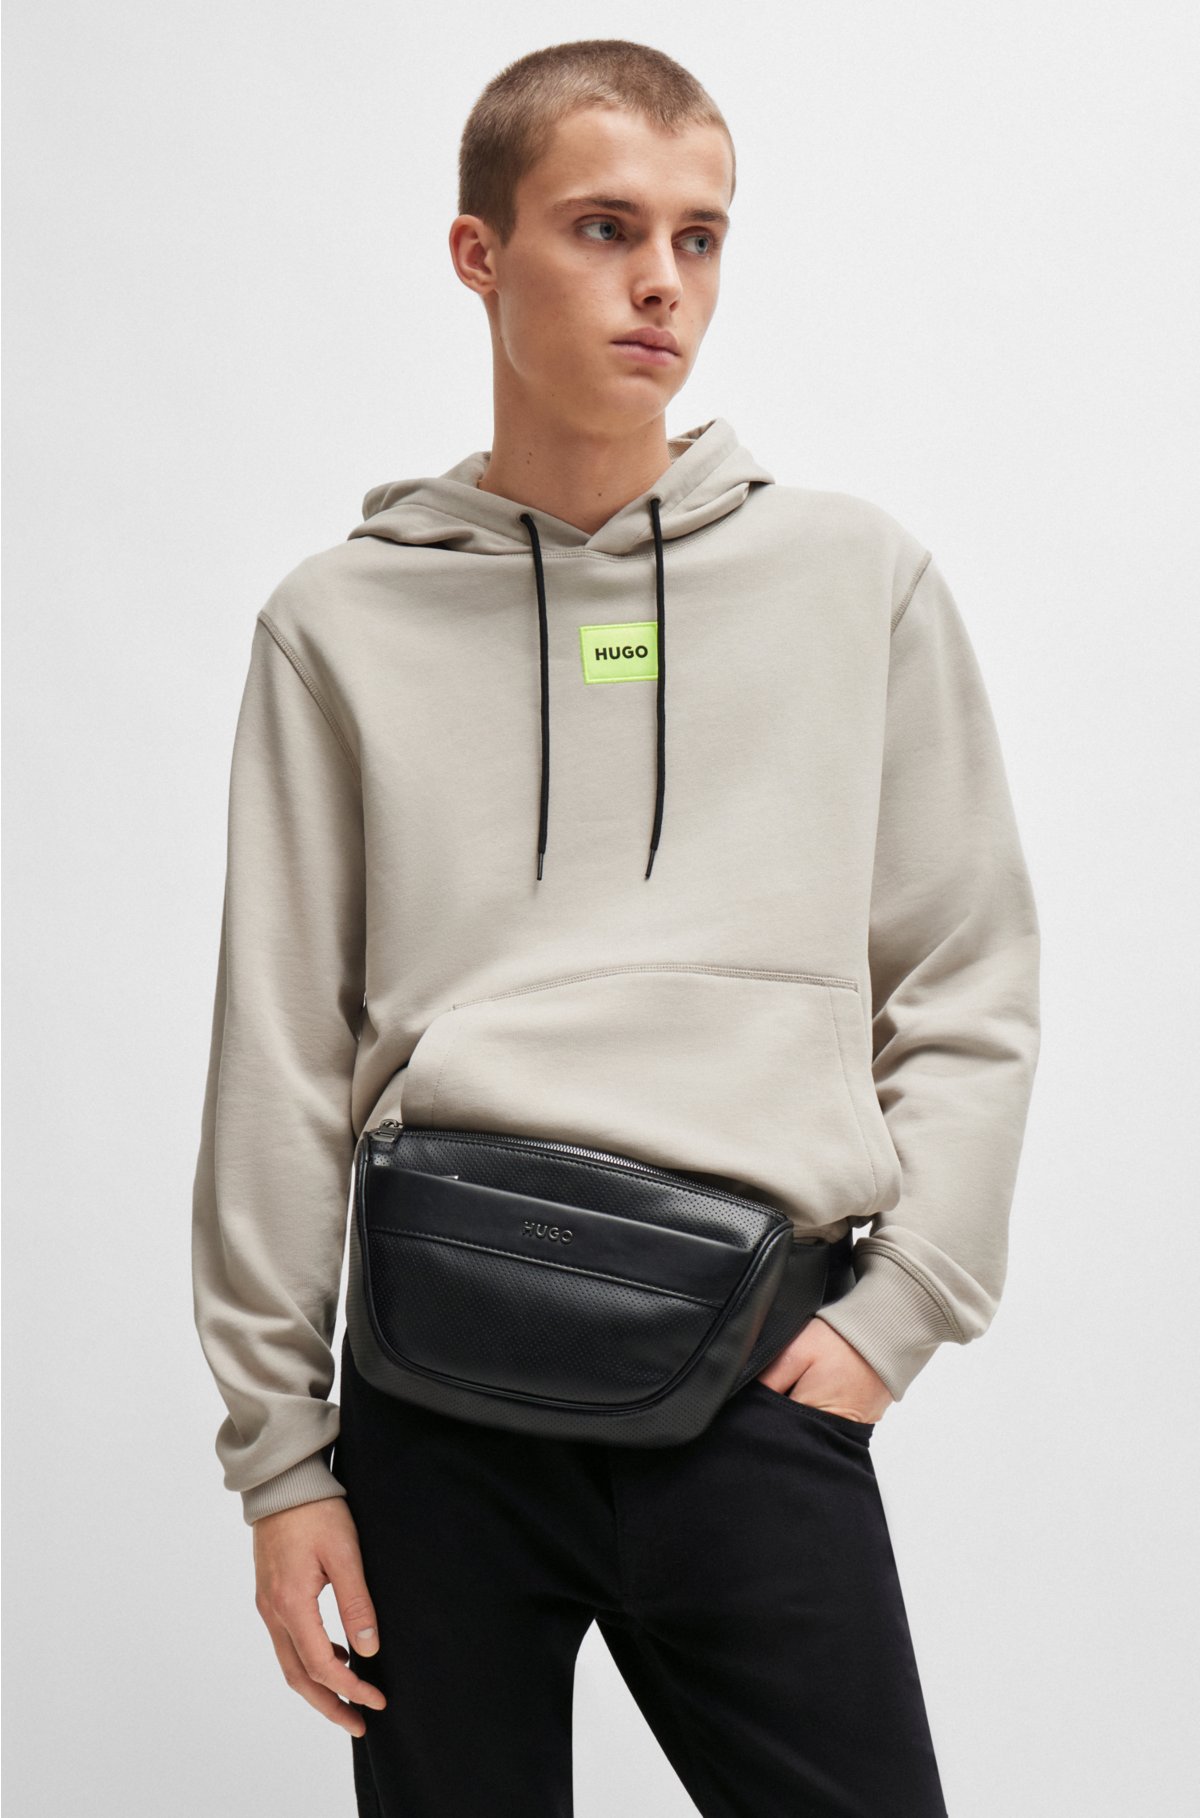 HUGO - Belt bag in perforated faux leather with logo lettering